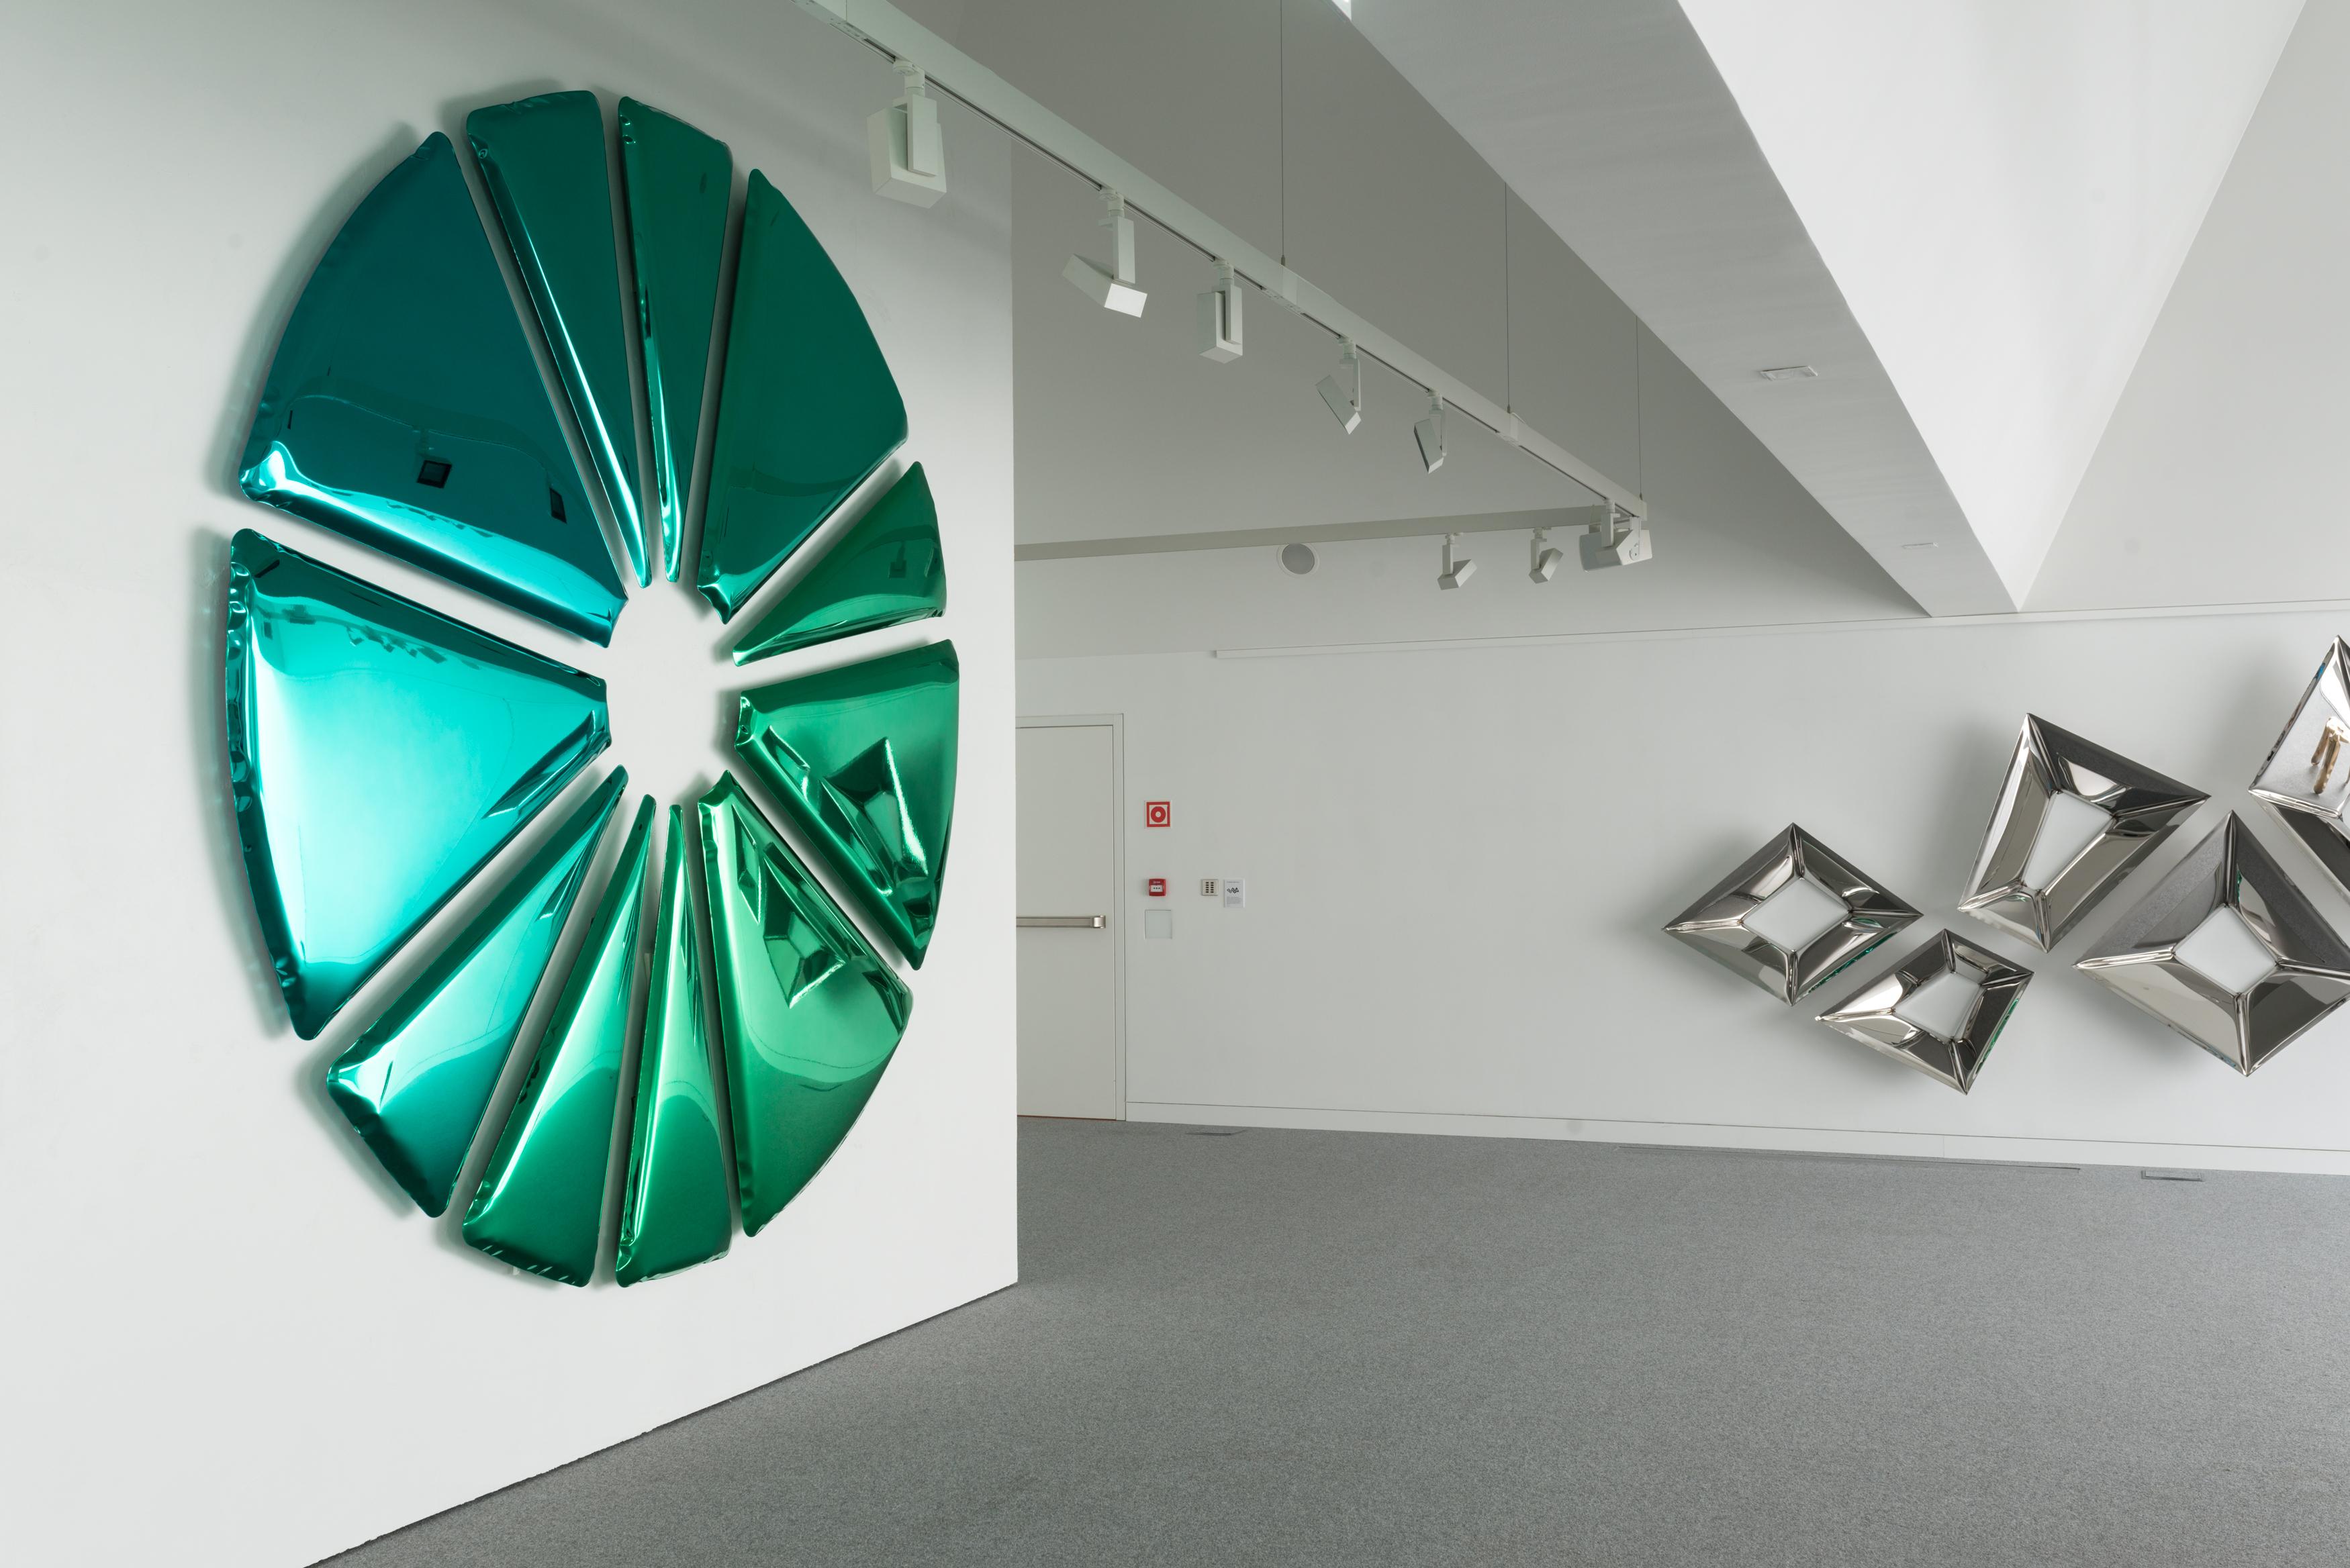 Nucleus Oversized Mirror Sculpture in Gradient Emerald and Sapphire In Excellent Condition For Sale In New York, NY